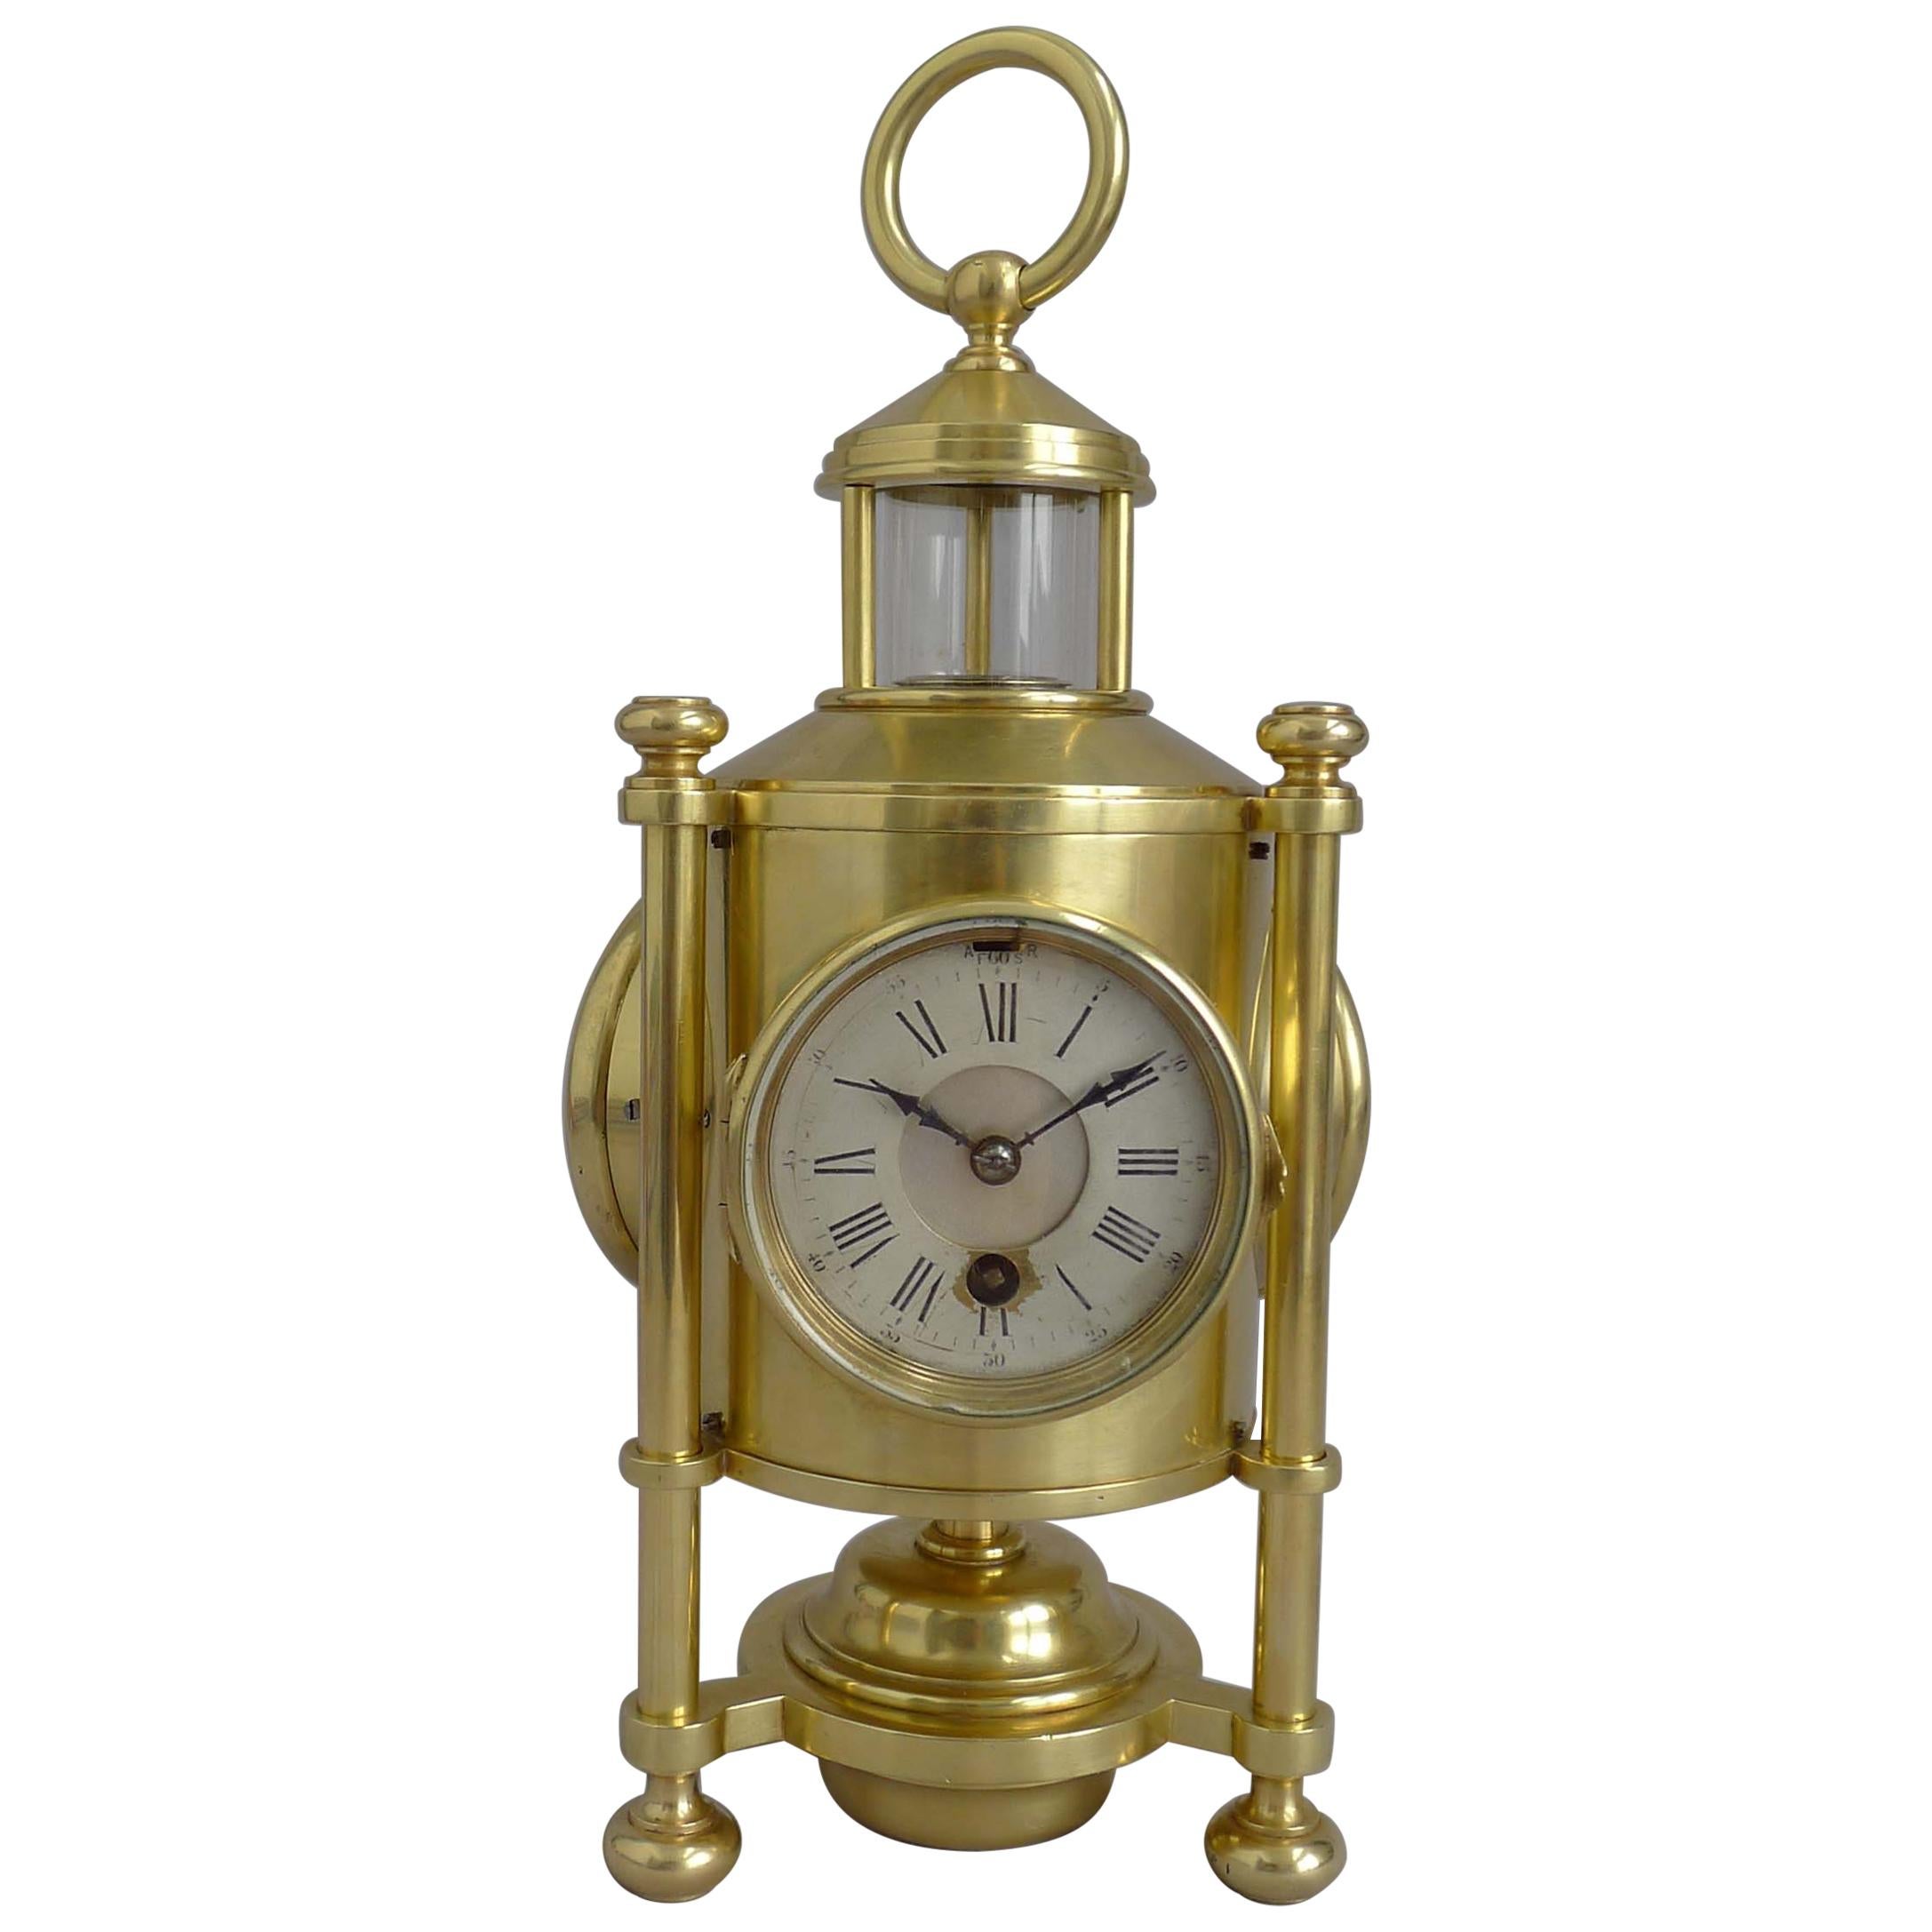 Industrial Series Weather Station Davys Miner's Lamp Clock Compendium by Guilmet